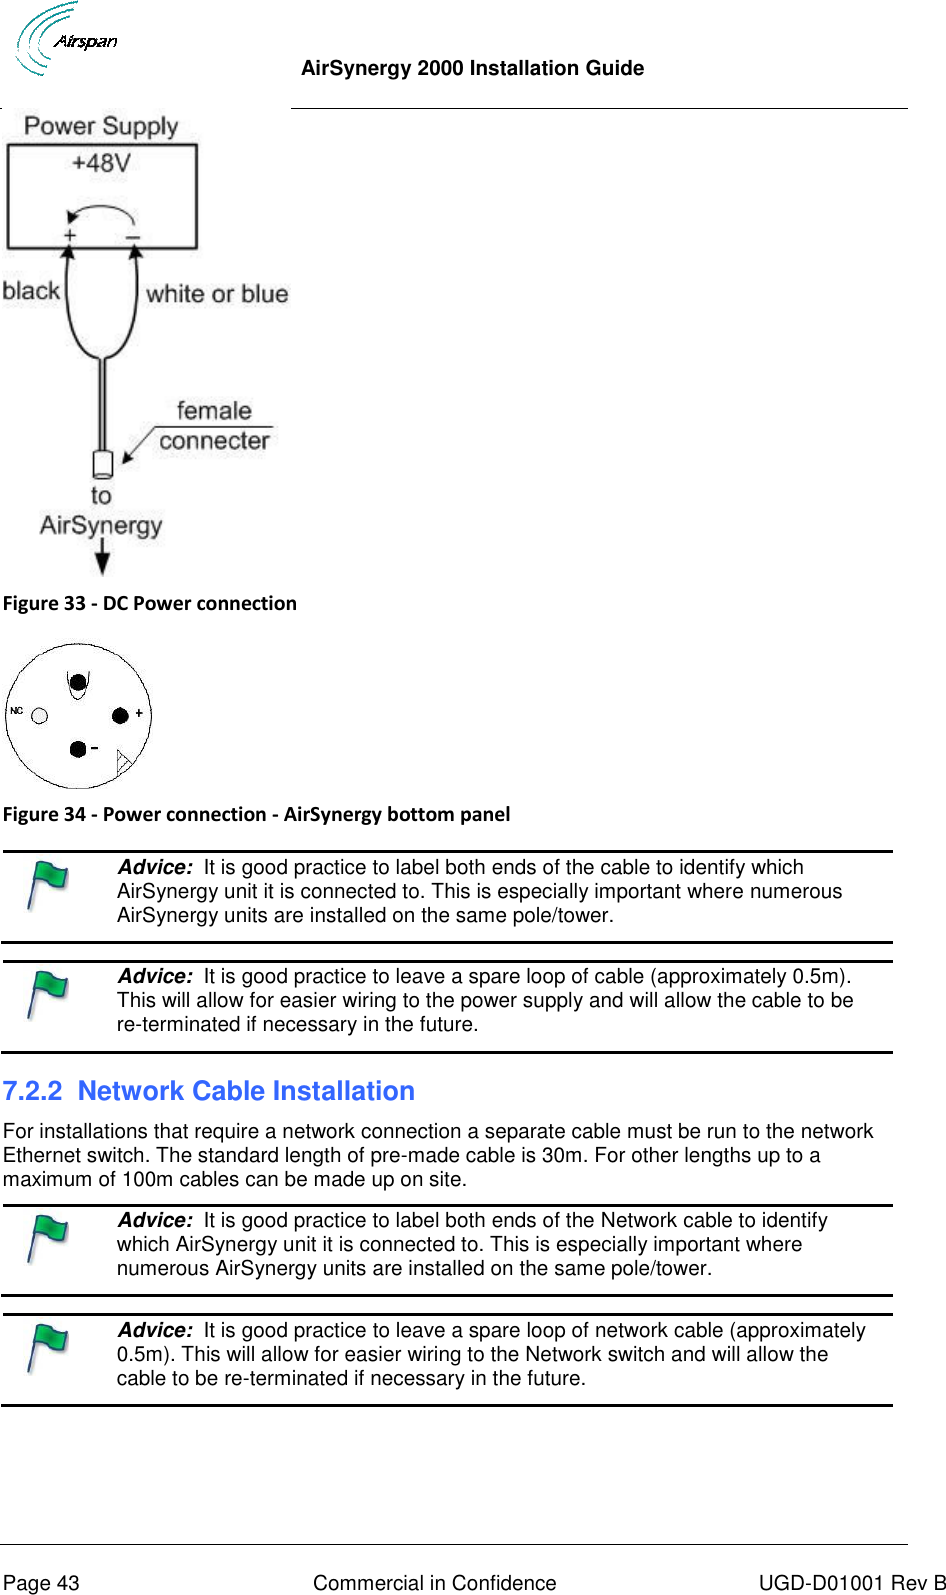  AirSynergy 2000 Installation Guide     Page 43  Commercial in Confidence  UGD-D01001 Rev B  Figure 33 - DC Power connection   Figure 34 - Power connection - AirSynergy bottom panel    Advice:  It is good practice to label both ends of the cable to identify which AirSynergy unit it is connected to. This is especially important where numerous AirSynergy units are installed on the same pole/tower.     Advice:  It is good practice to leave a spare loop of cable (approximately 0.5m). This will allow for easier wiring to the power supply and will allow the cable to be re-terminated if necessary in the future.  7.2.2  Network Cable Installation For installations that require a network connection a separate cable must be run to the network Ethernet switch. The standard length of pre-made cable is 30m. For other lengths up to a maximum of 100m cables can be made up on site.   Advice:  It is good practice to label both ends of the Network cable to identify which AirSynergy unit it is connected to. This is especially important where numerous AirSynergy units are installed on the same pole/tower.     Advice:  It is good practice to leave a spare loop of network cable (approximately 0.5m). This will allow for easier wiring to the Network switch and will allow the cable to be re-terminated if necessary in the future.   